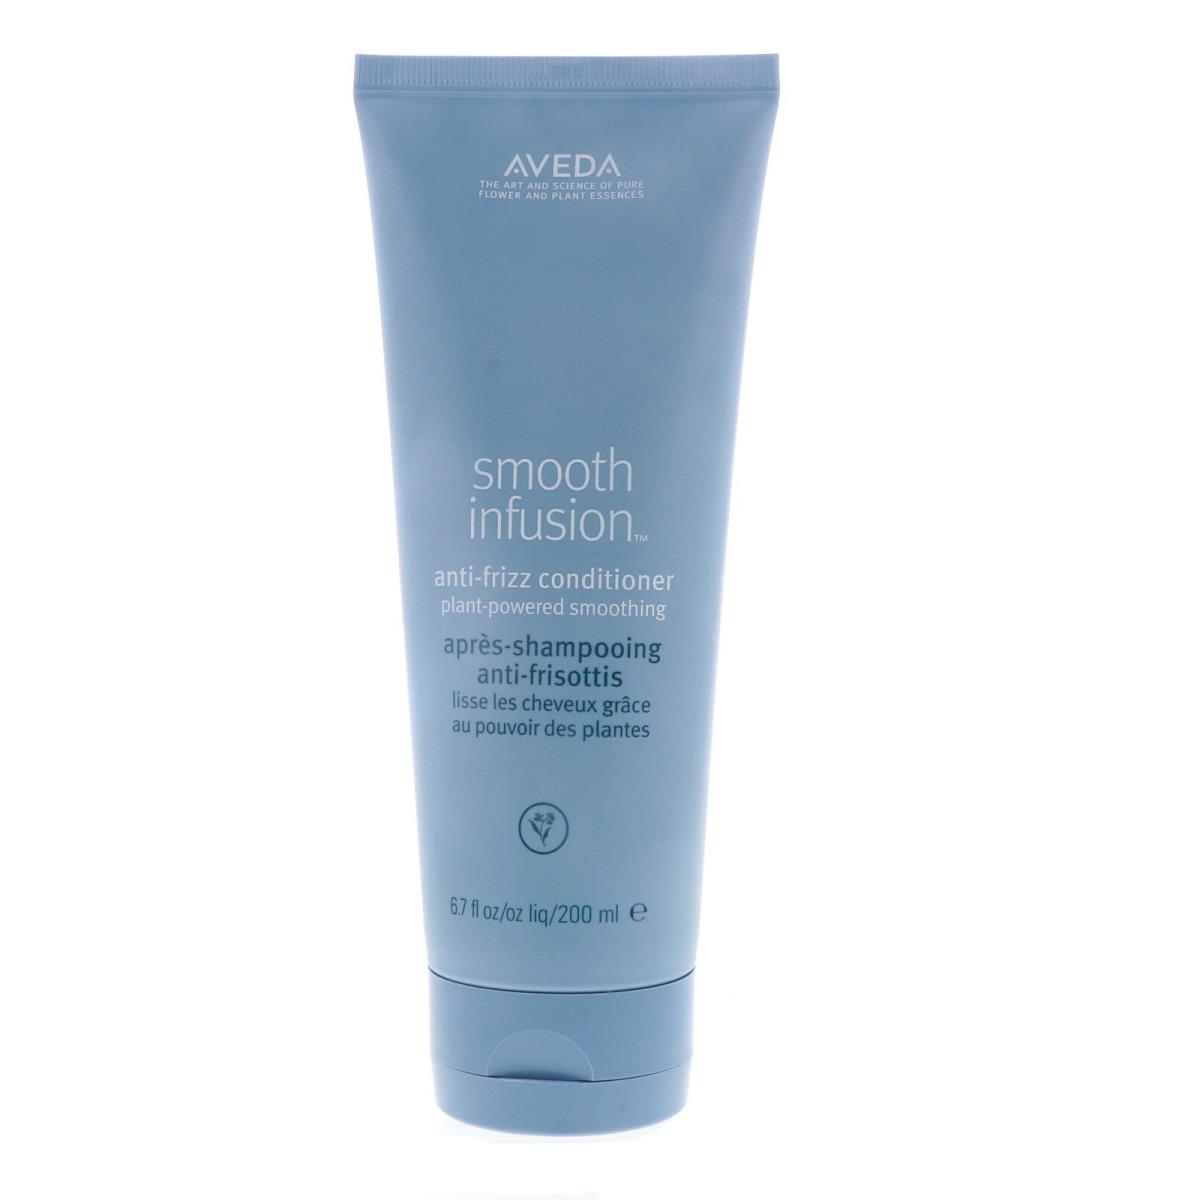 Aveda Smooth Infusion Anti-frizz Conditioner 6.7 oz Pack of 3